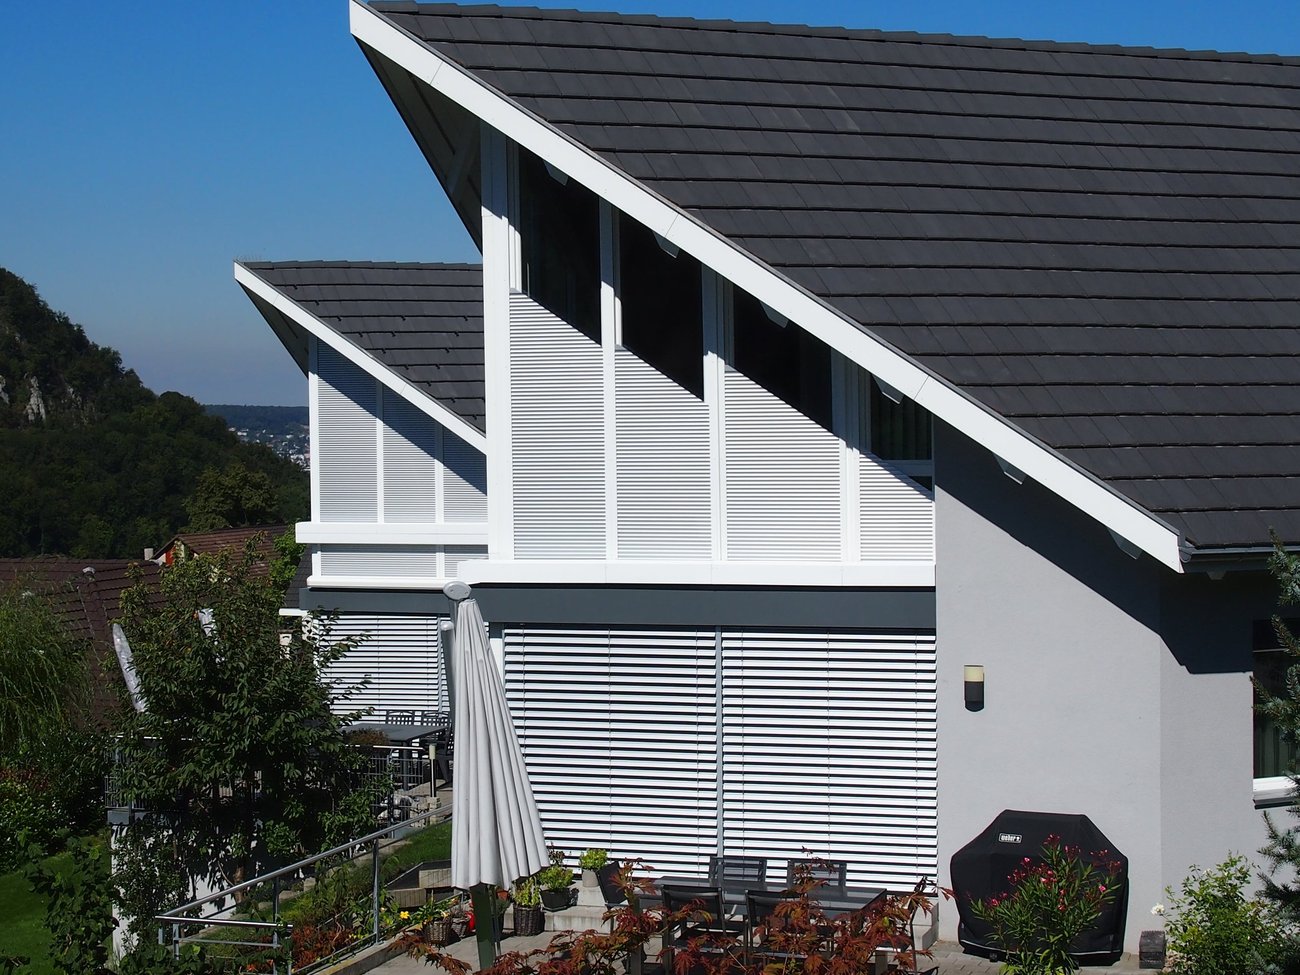  House with sloping roof and sloping roller shutter